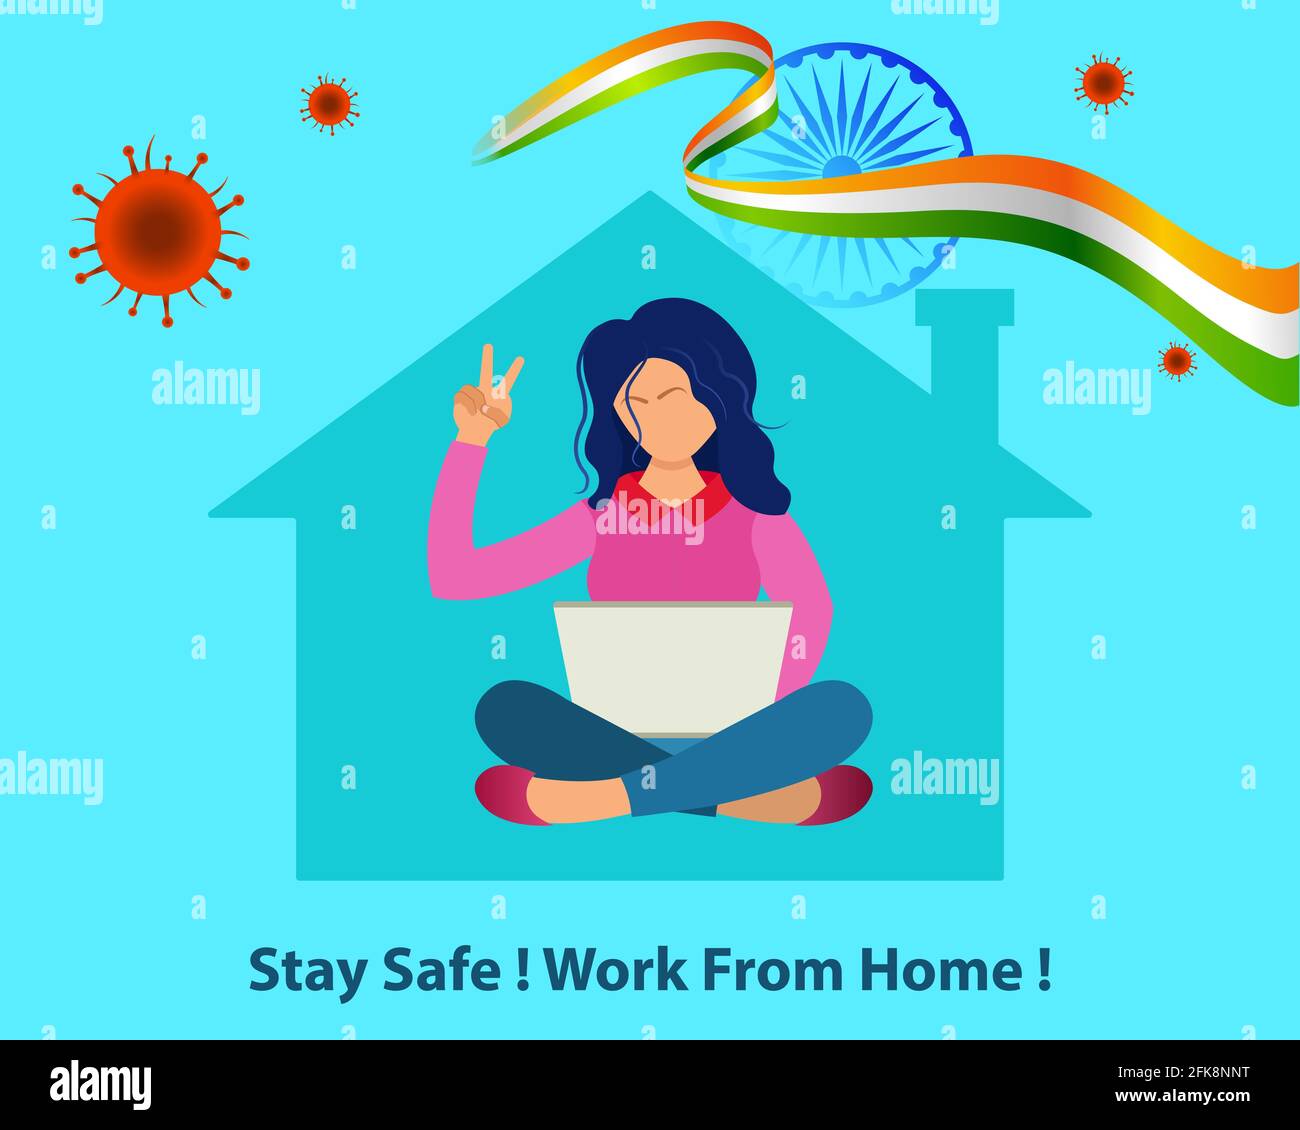 Work from home India due to Covid-19 worldwide pandemic. Stay home save lives. Home quarantine. Grow economy, save nature and fight with corona virus. Stock Vector